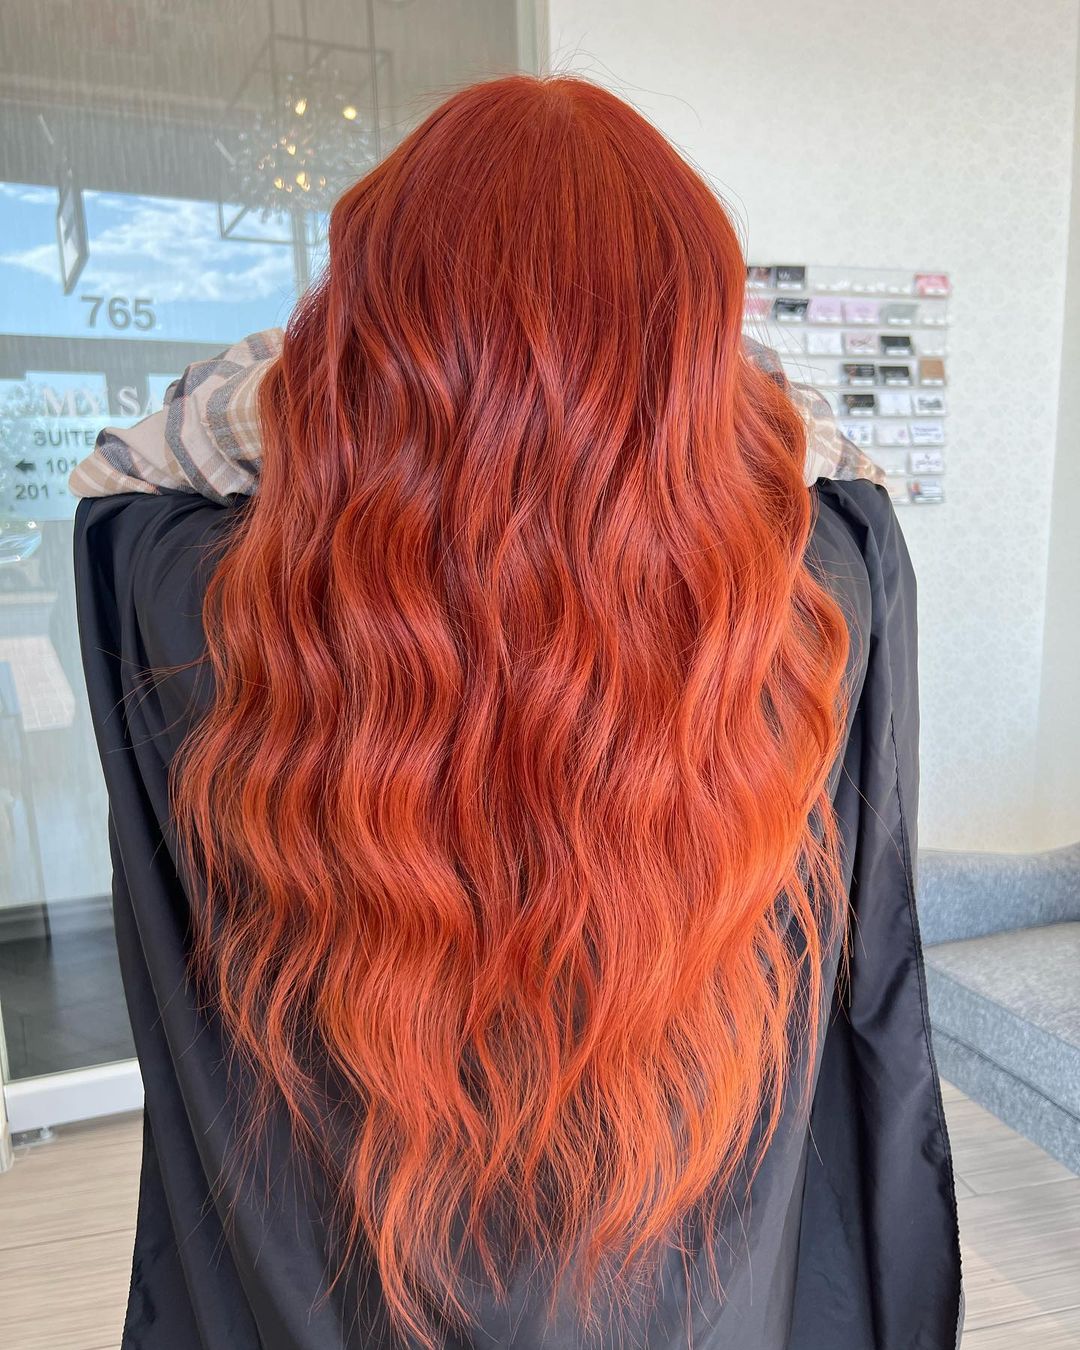 https://www.zohna.com/wp-content/uploads/red-copper-balayage-1.jpg